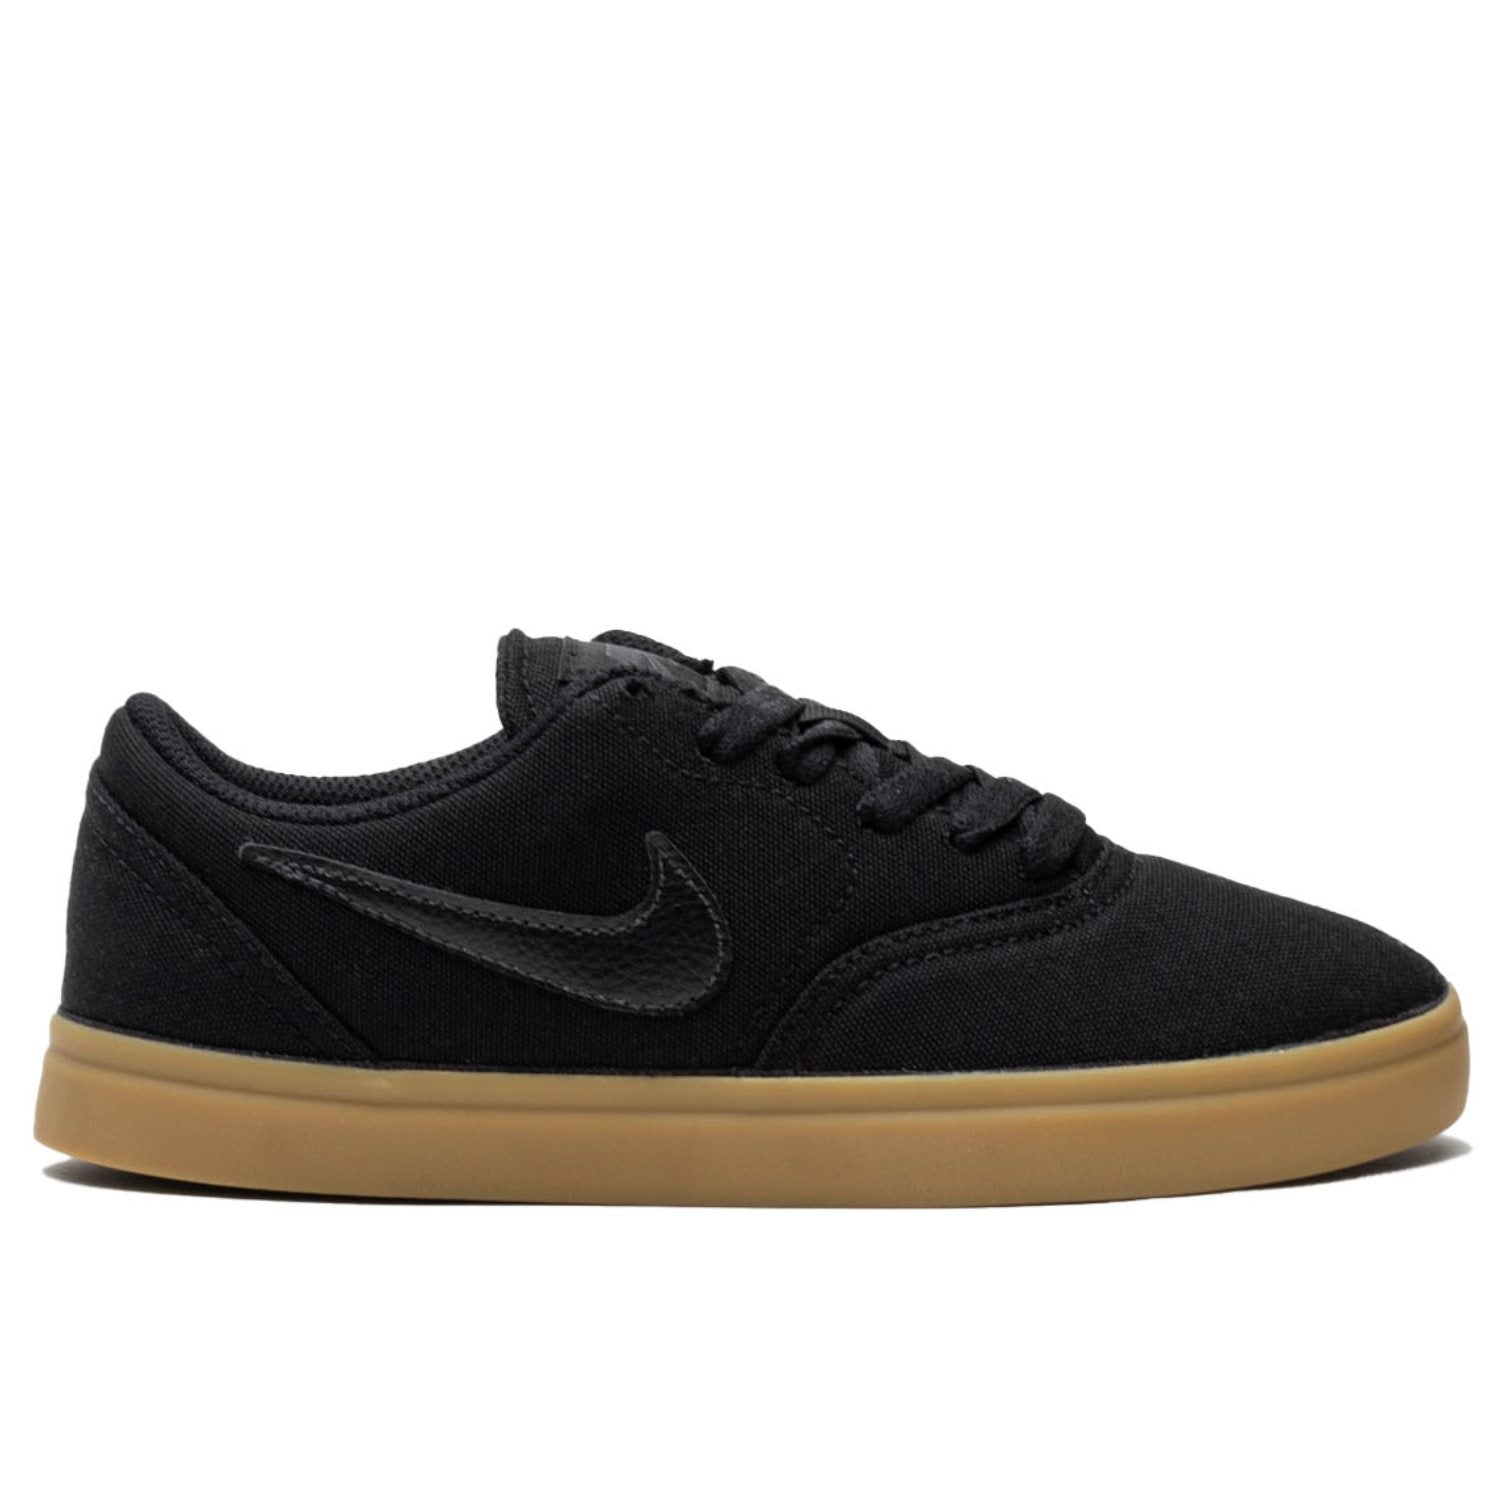 Nike SB - Check Canvas (GS) - 905373-006 black with gum sole youth skate shoe footwear